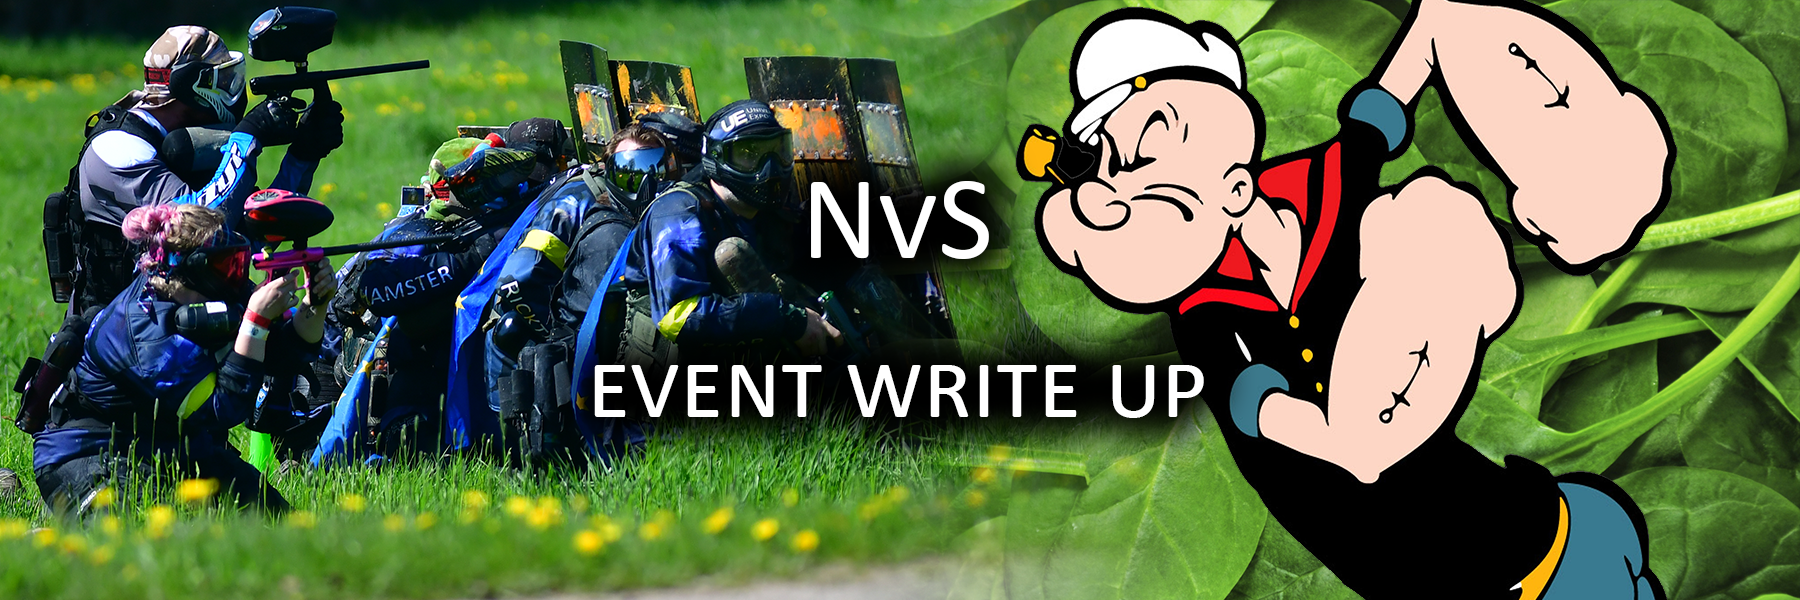 North Versus South Event Writeup